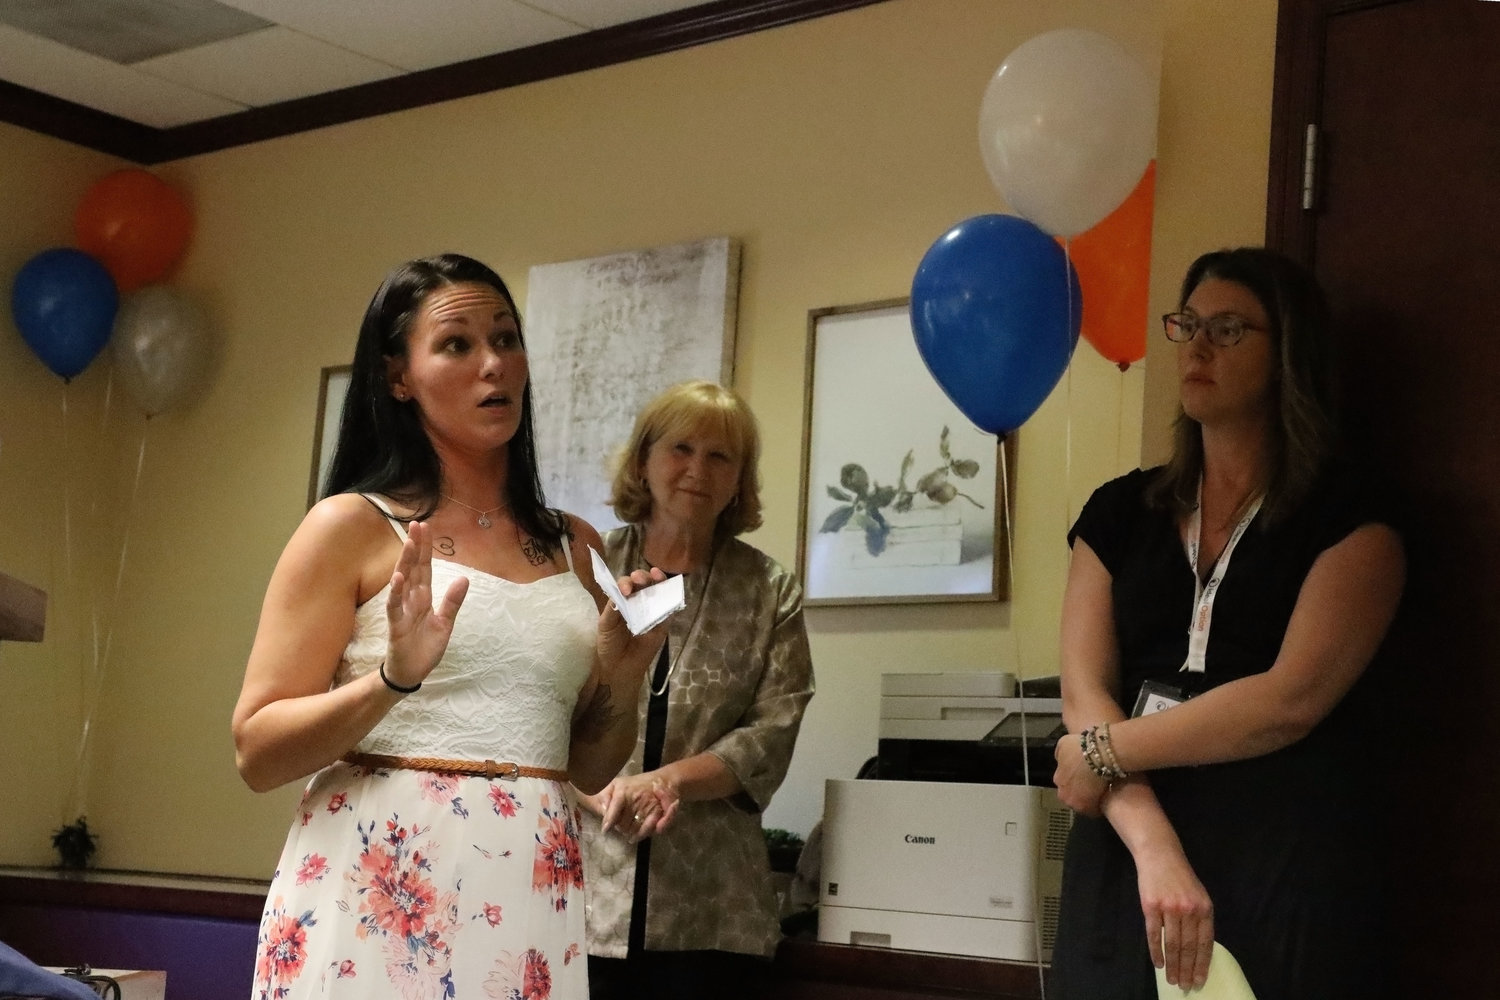 Vancouver resident Jenna Tuttle (left) shares her story with Anne McEnerny-Ogle, the Mayor of Vancouver (center), and advanced registered nurse practitioner Lindsey Huckett at the grand opening of Ideal Option in Vancouver Aug. 1. Tuttle has been now sober for three years, thanks to the help of Ideal Option.